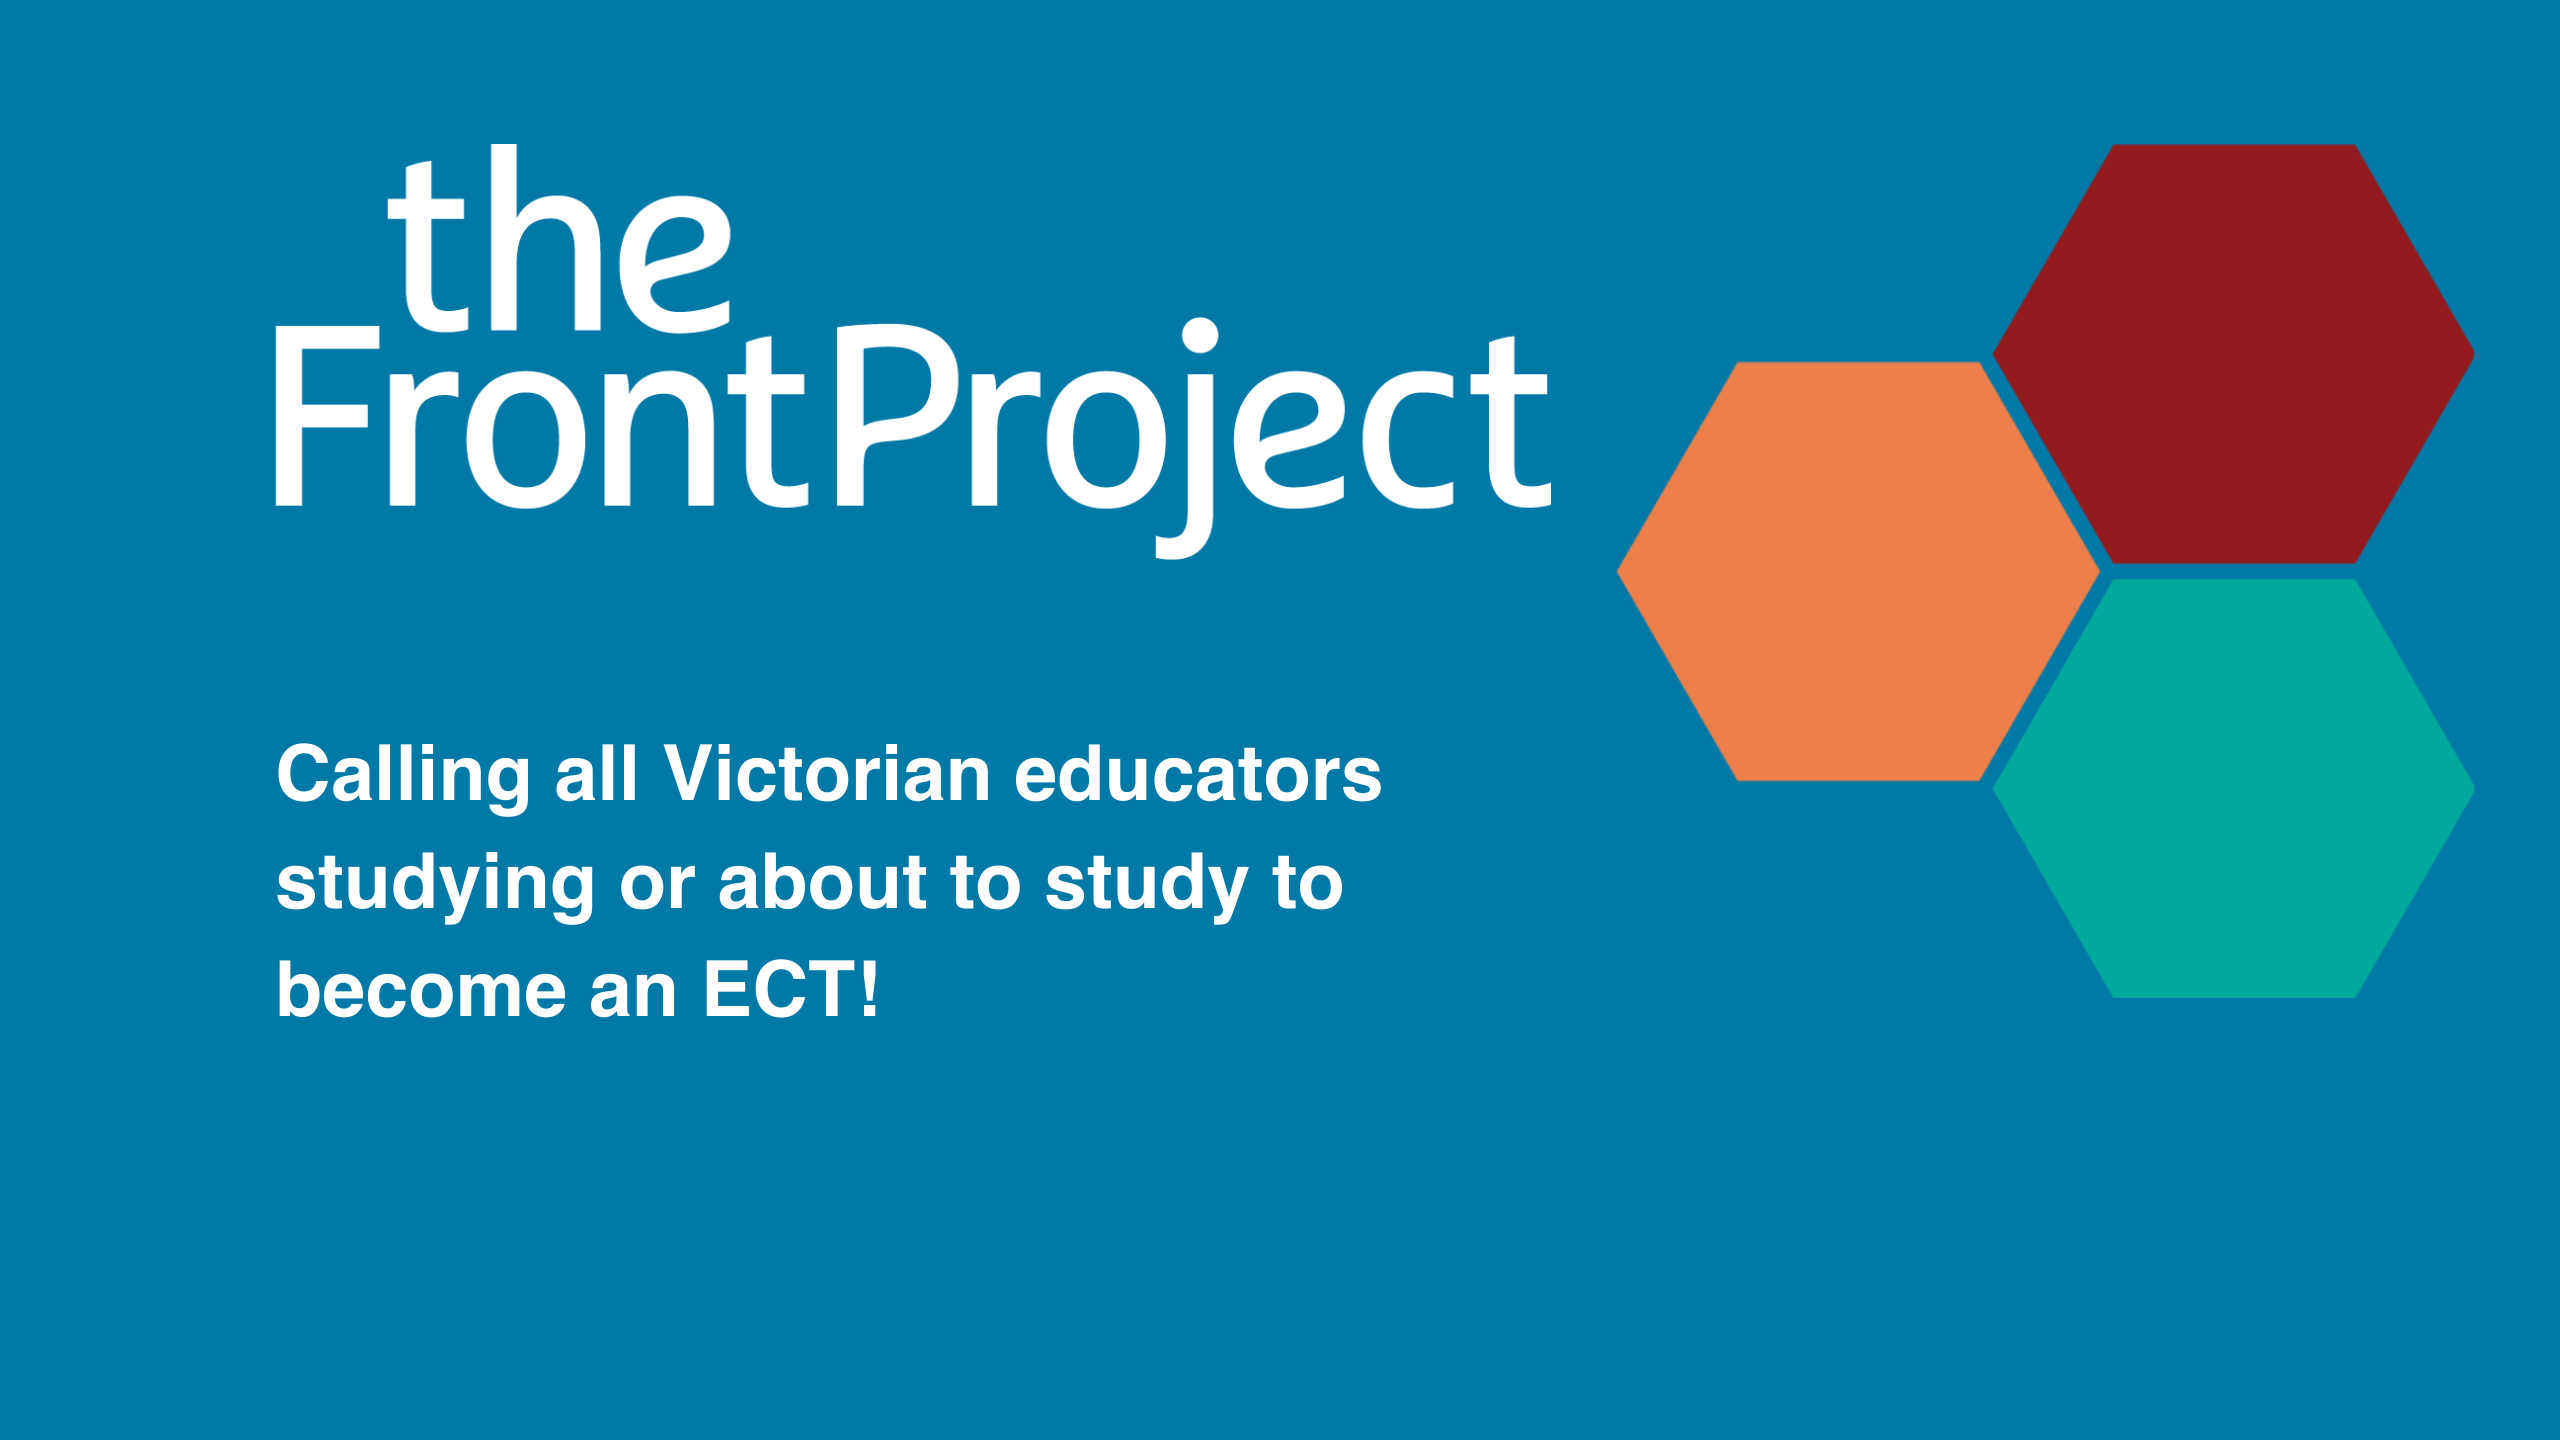 Calling all Victorian educators studying or about to study to become an ECT!